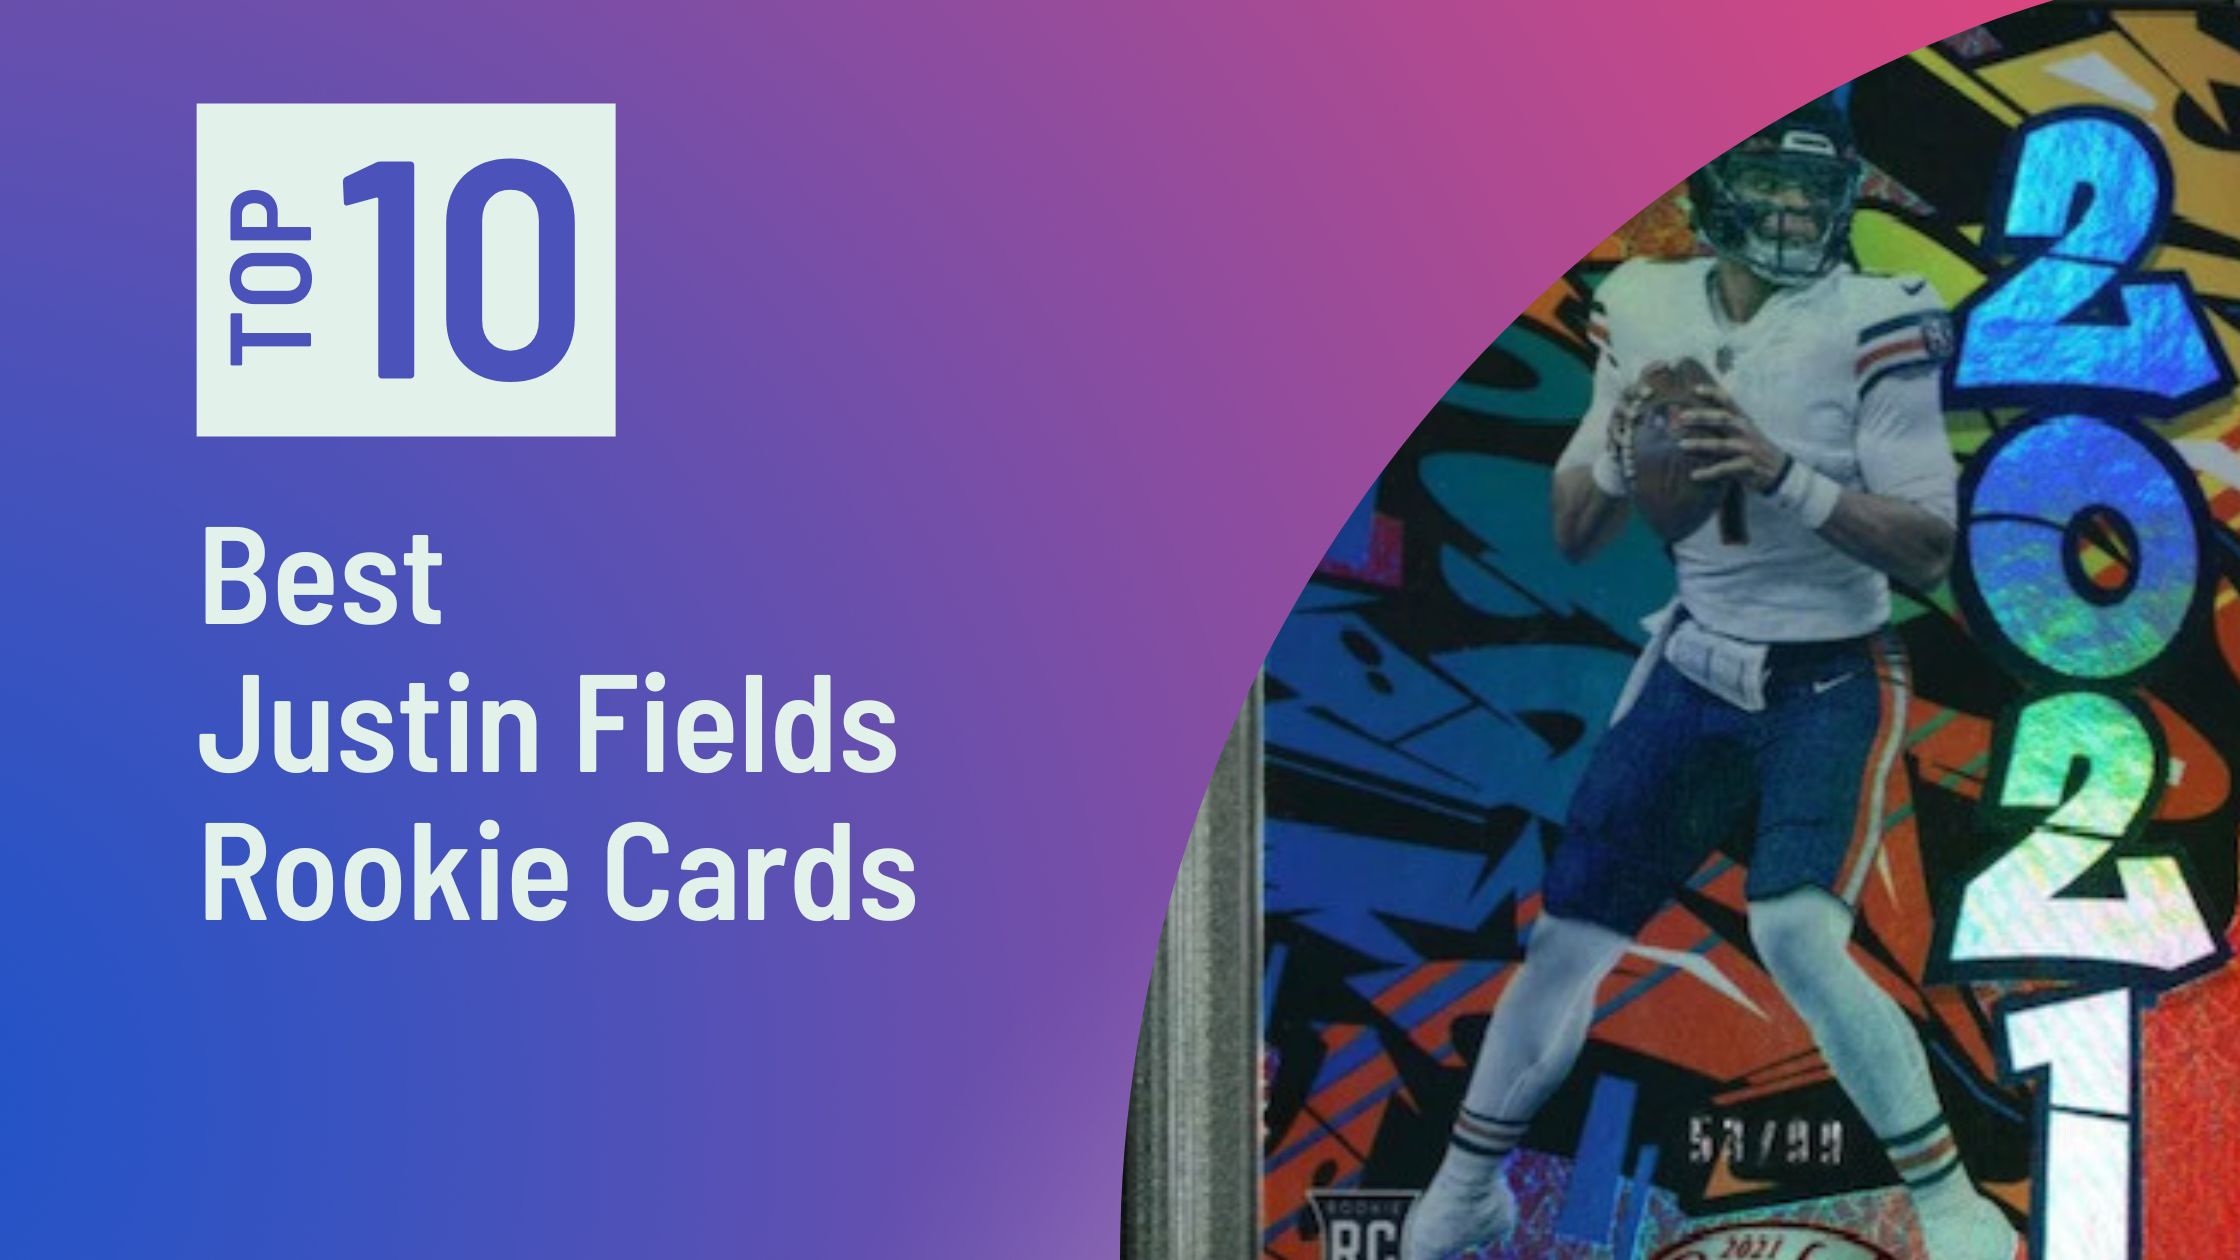 Featured image for the Best Justin Fields Rookie Cards blog post on Sports Card Sharks